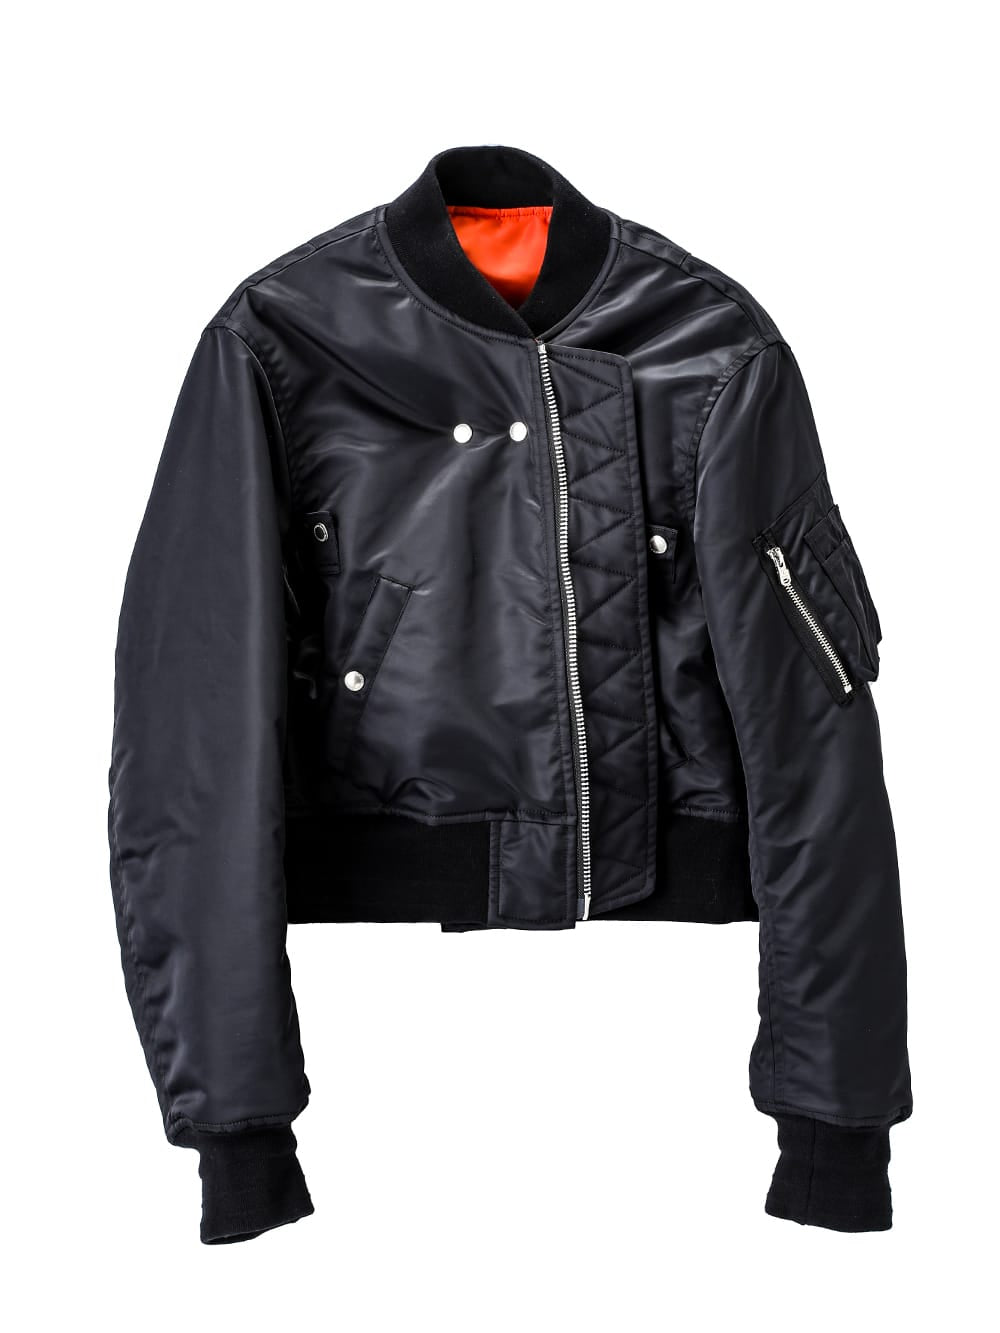 sj.0018bAW23-black two-way cropped bomber jacket. THE TWO OF US 